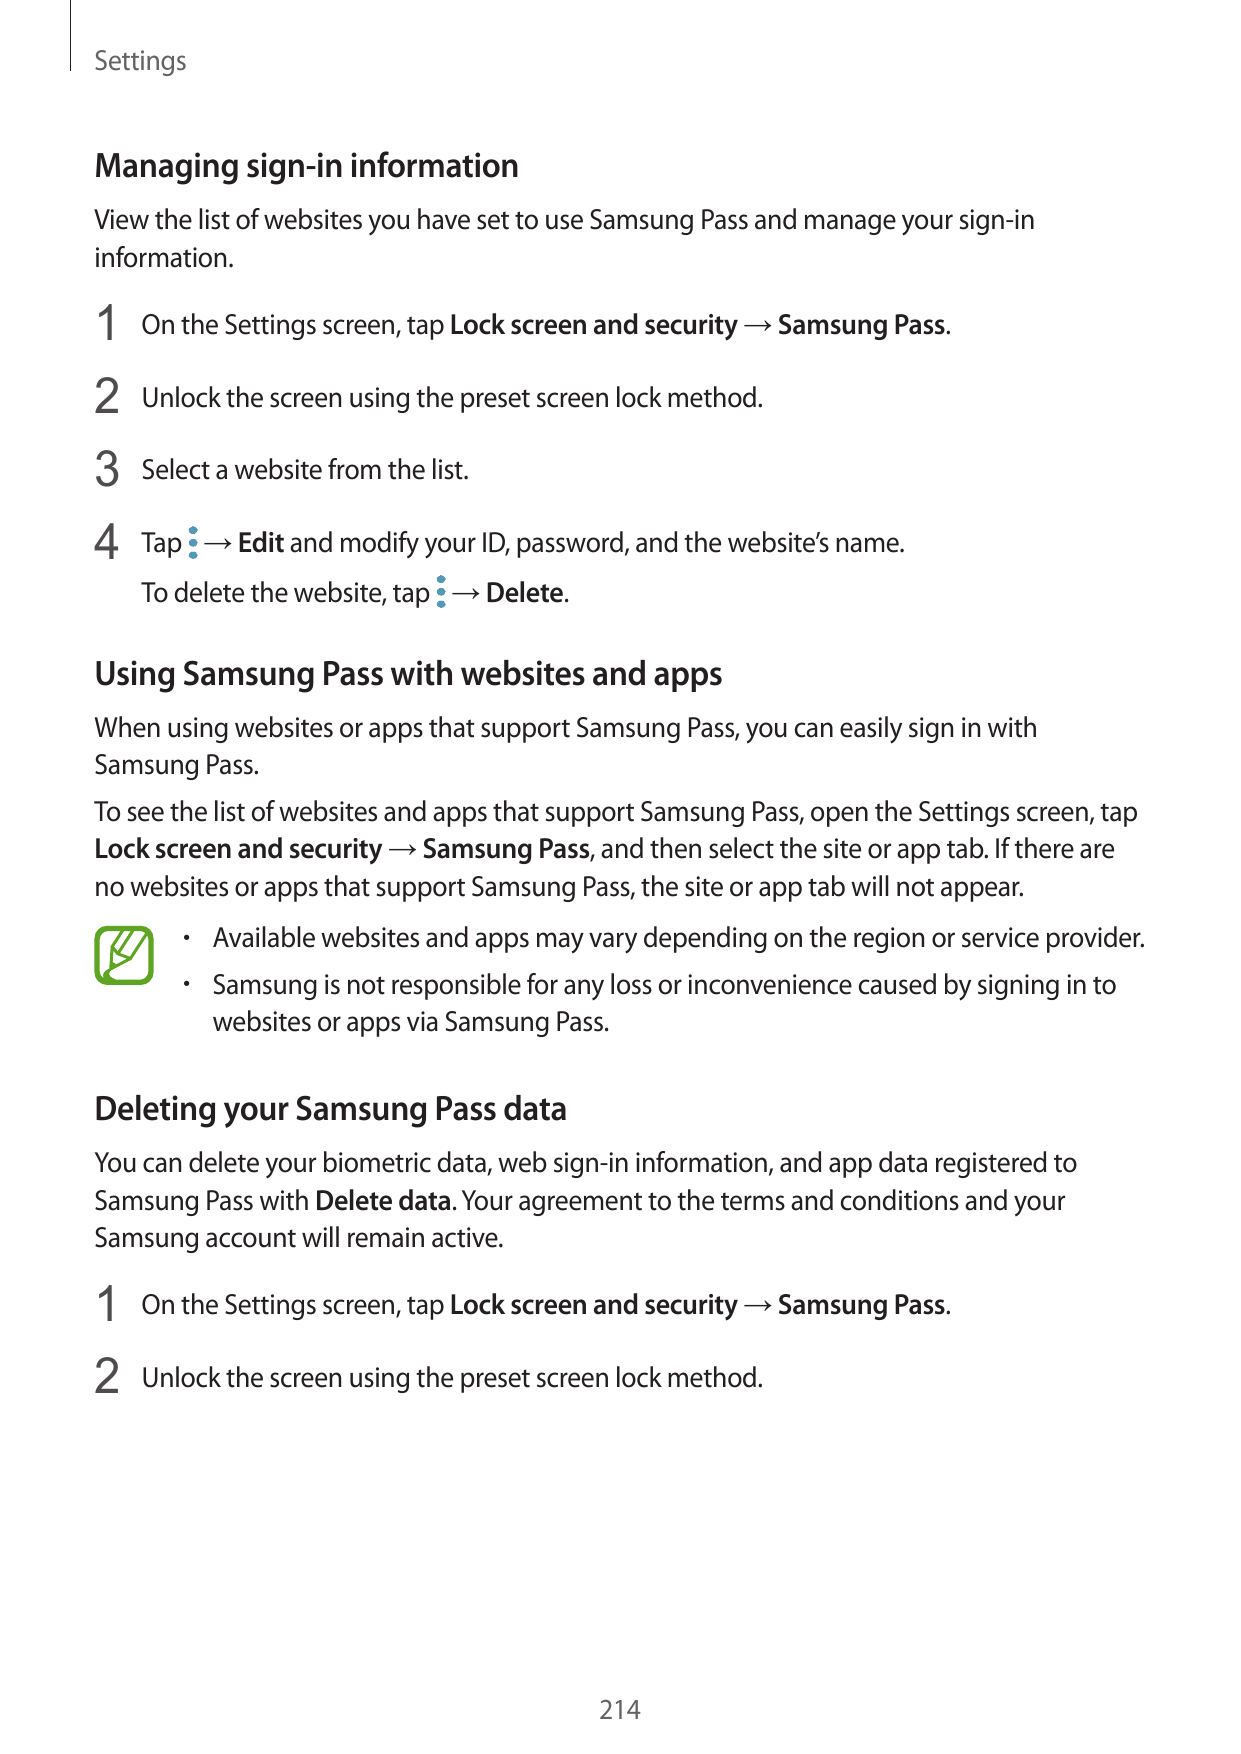 SettingsManaging sign-in informationView the list of websites you have set to use Samsung Pass and manage your sign-ininformatio